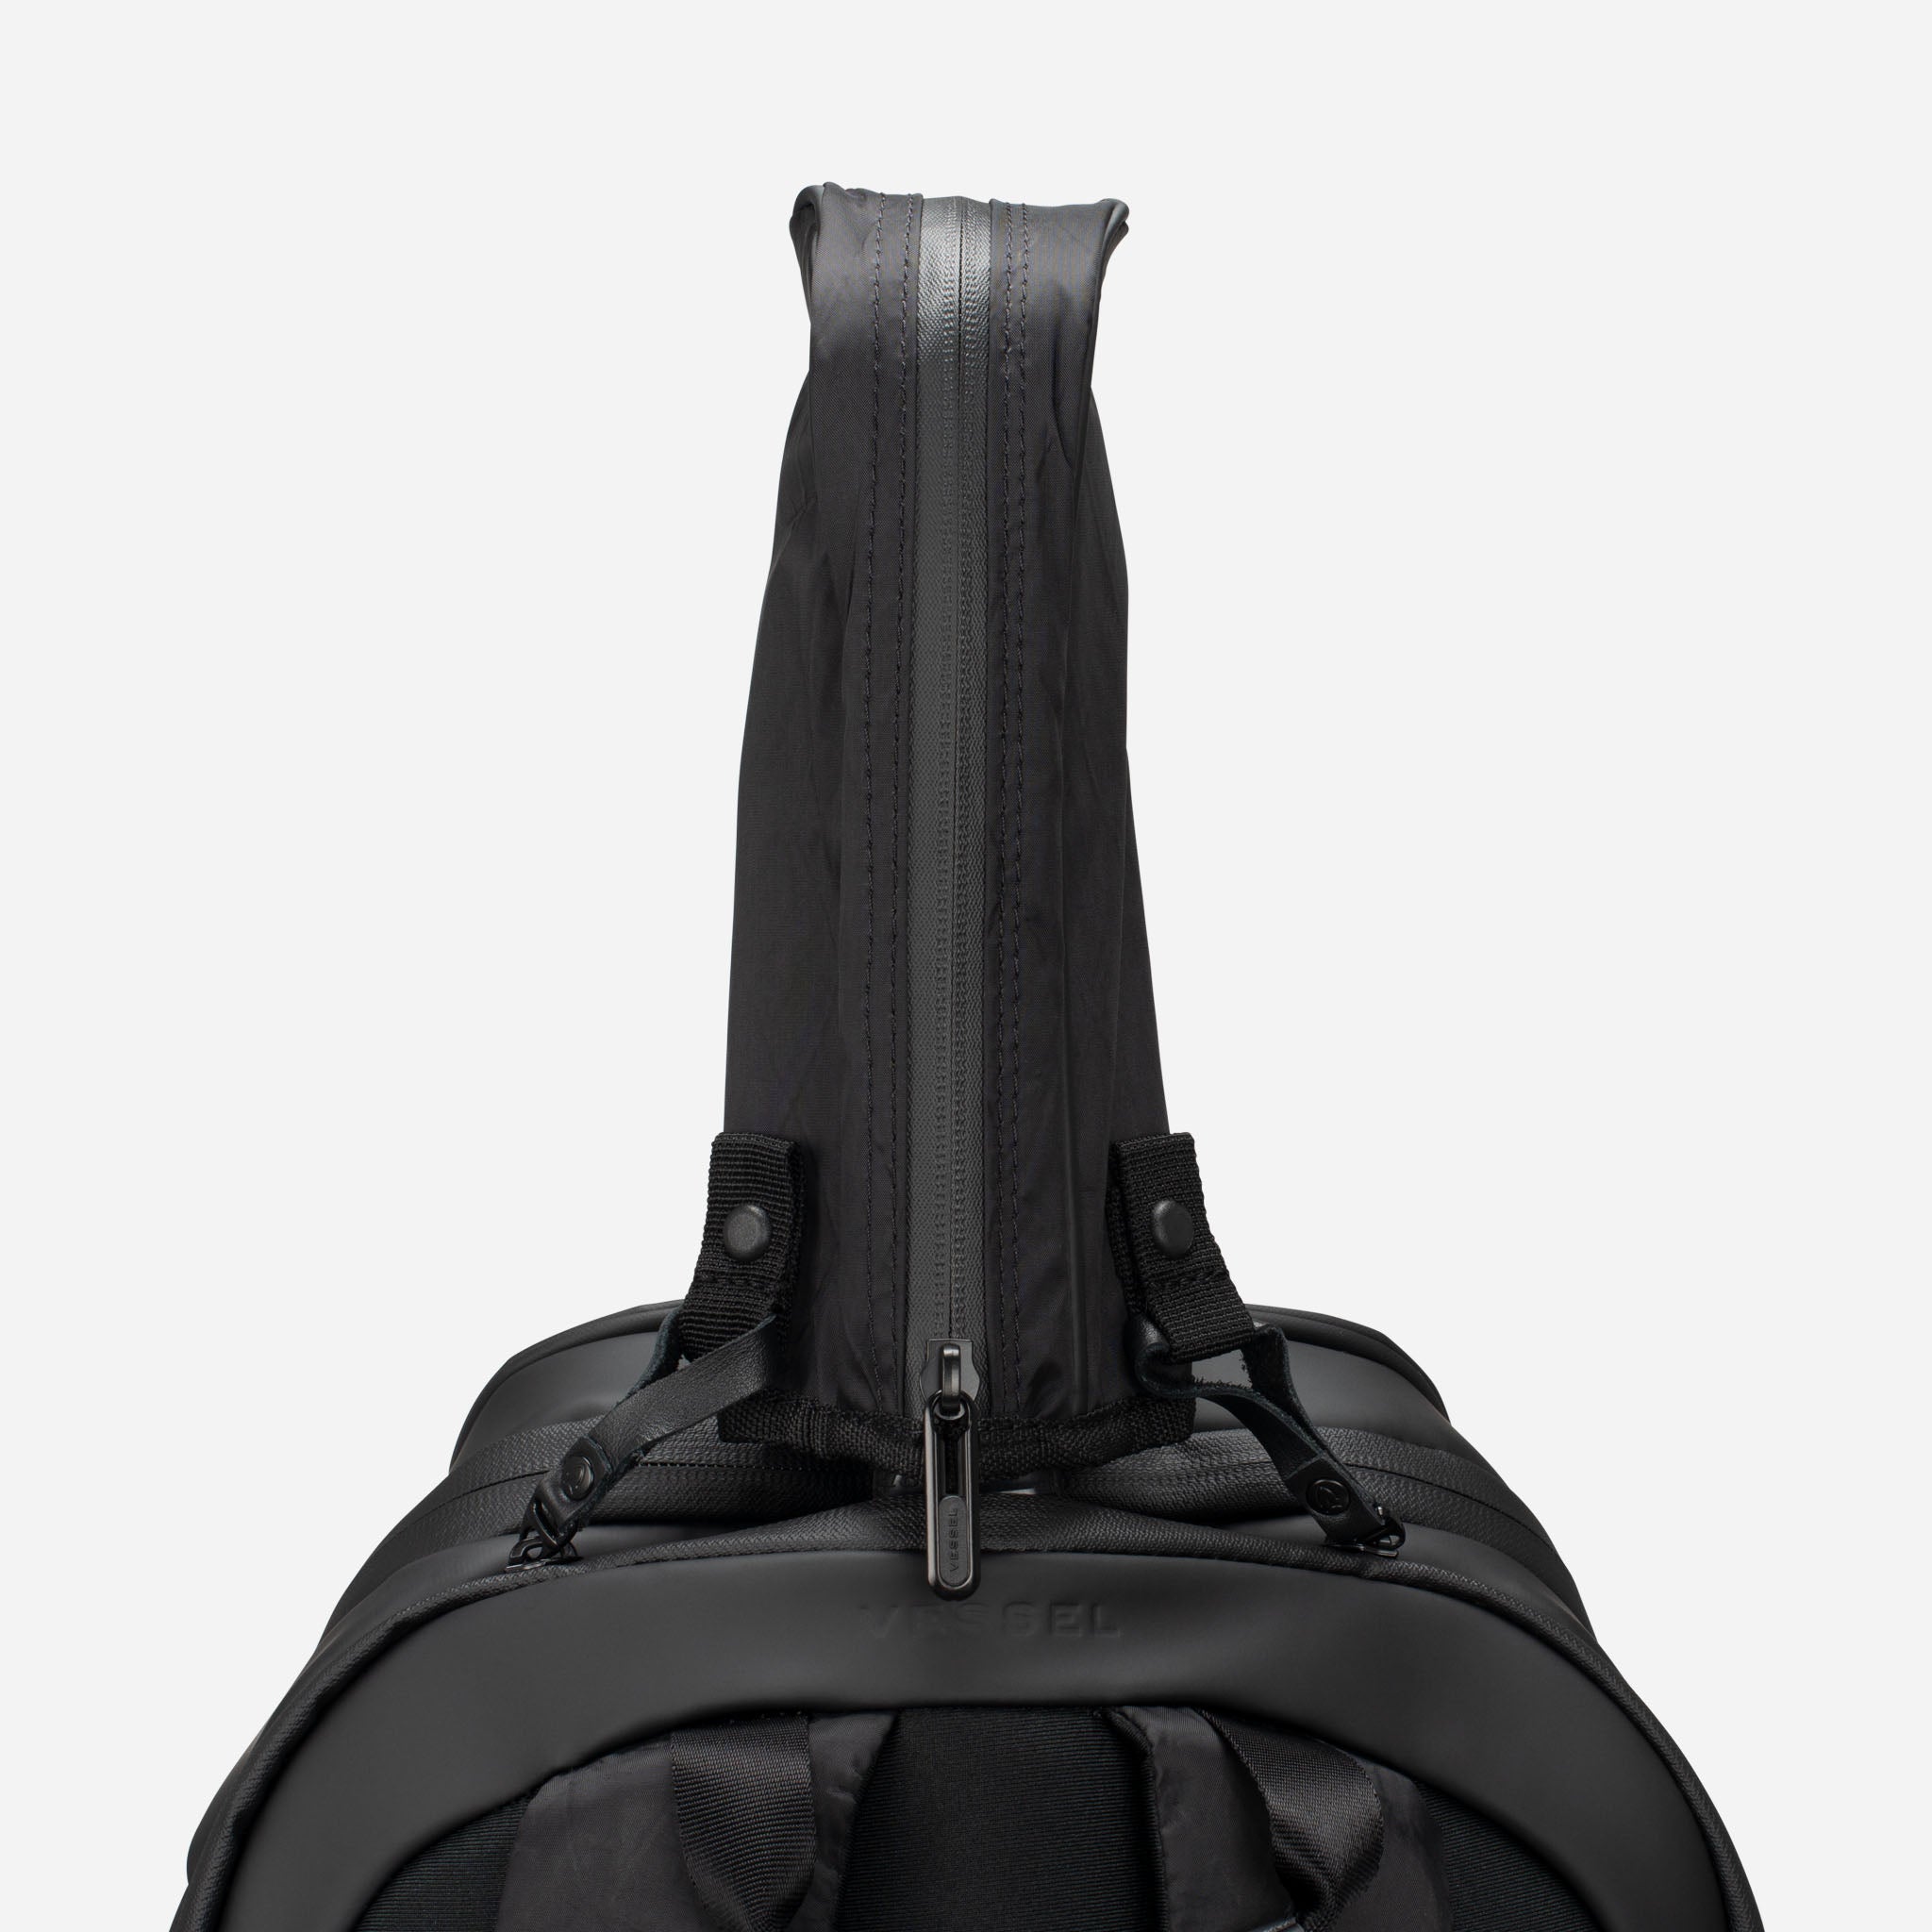 Black tennis racquet handle cover sticking out of black tennis backpack